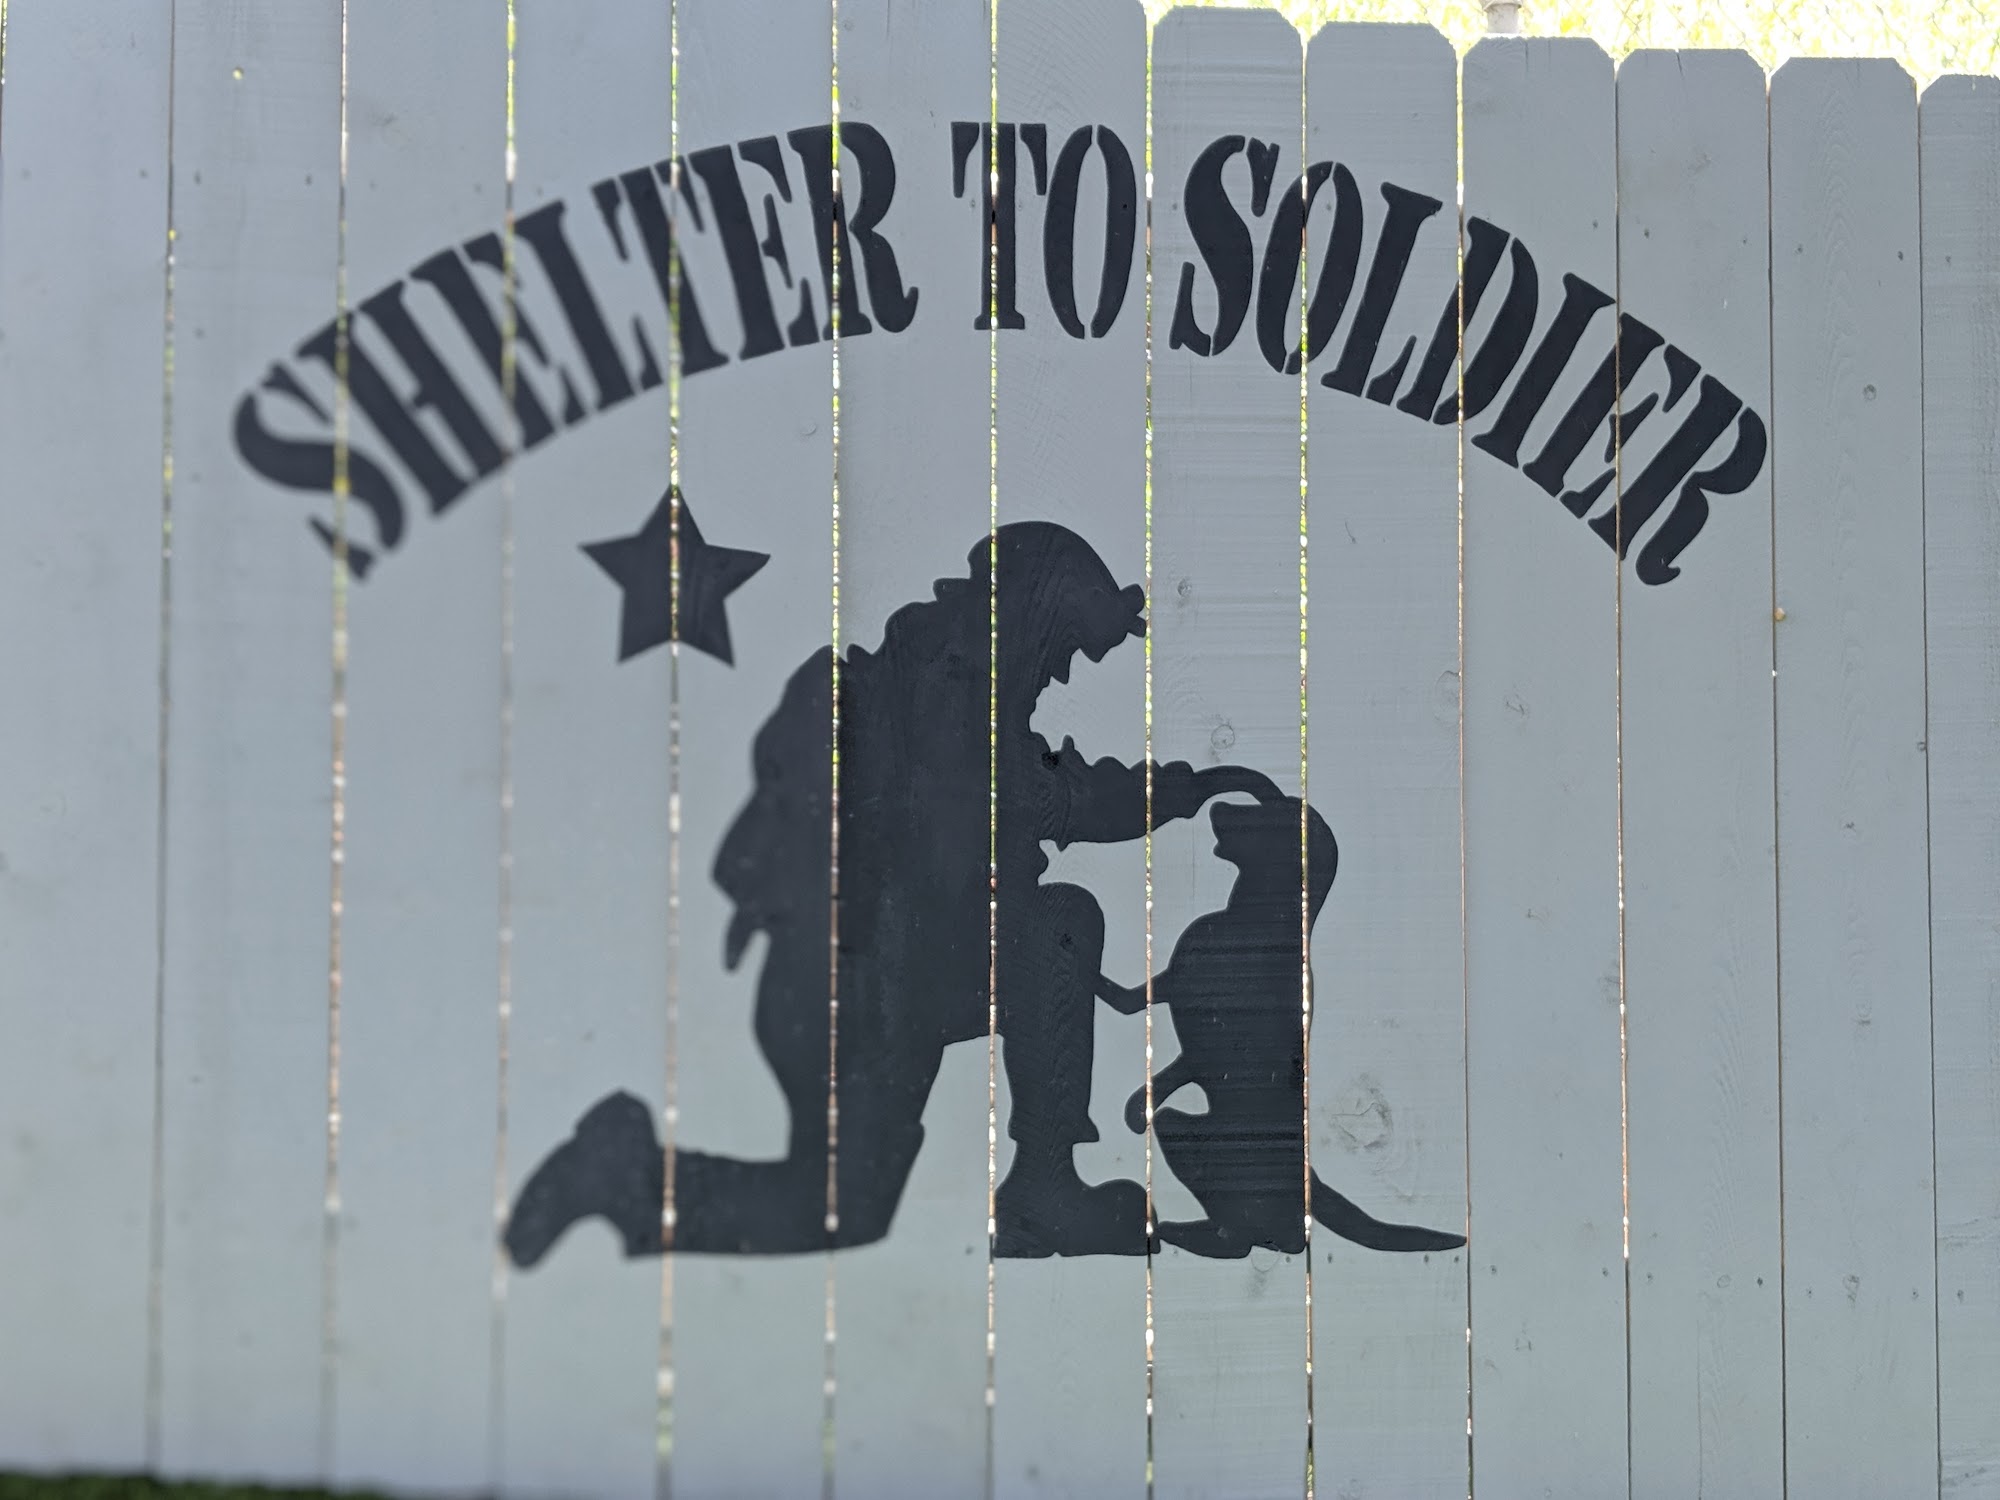 Shelter to Soldier